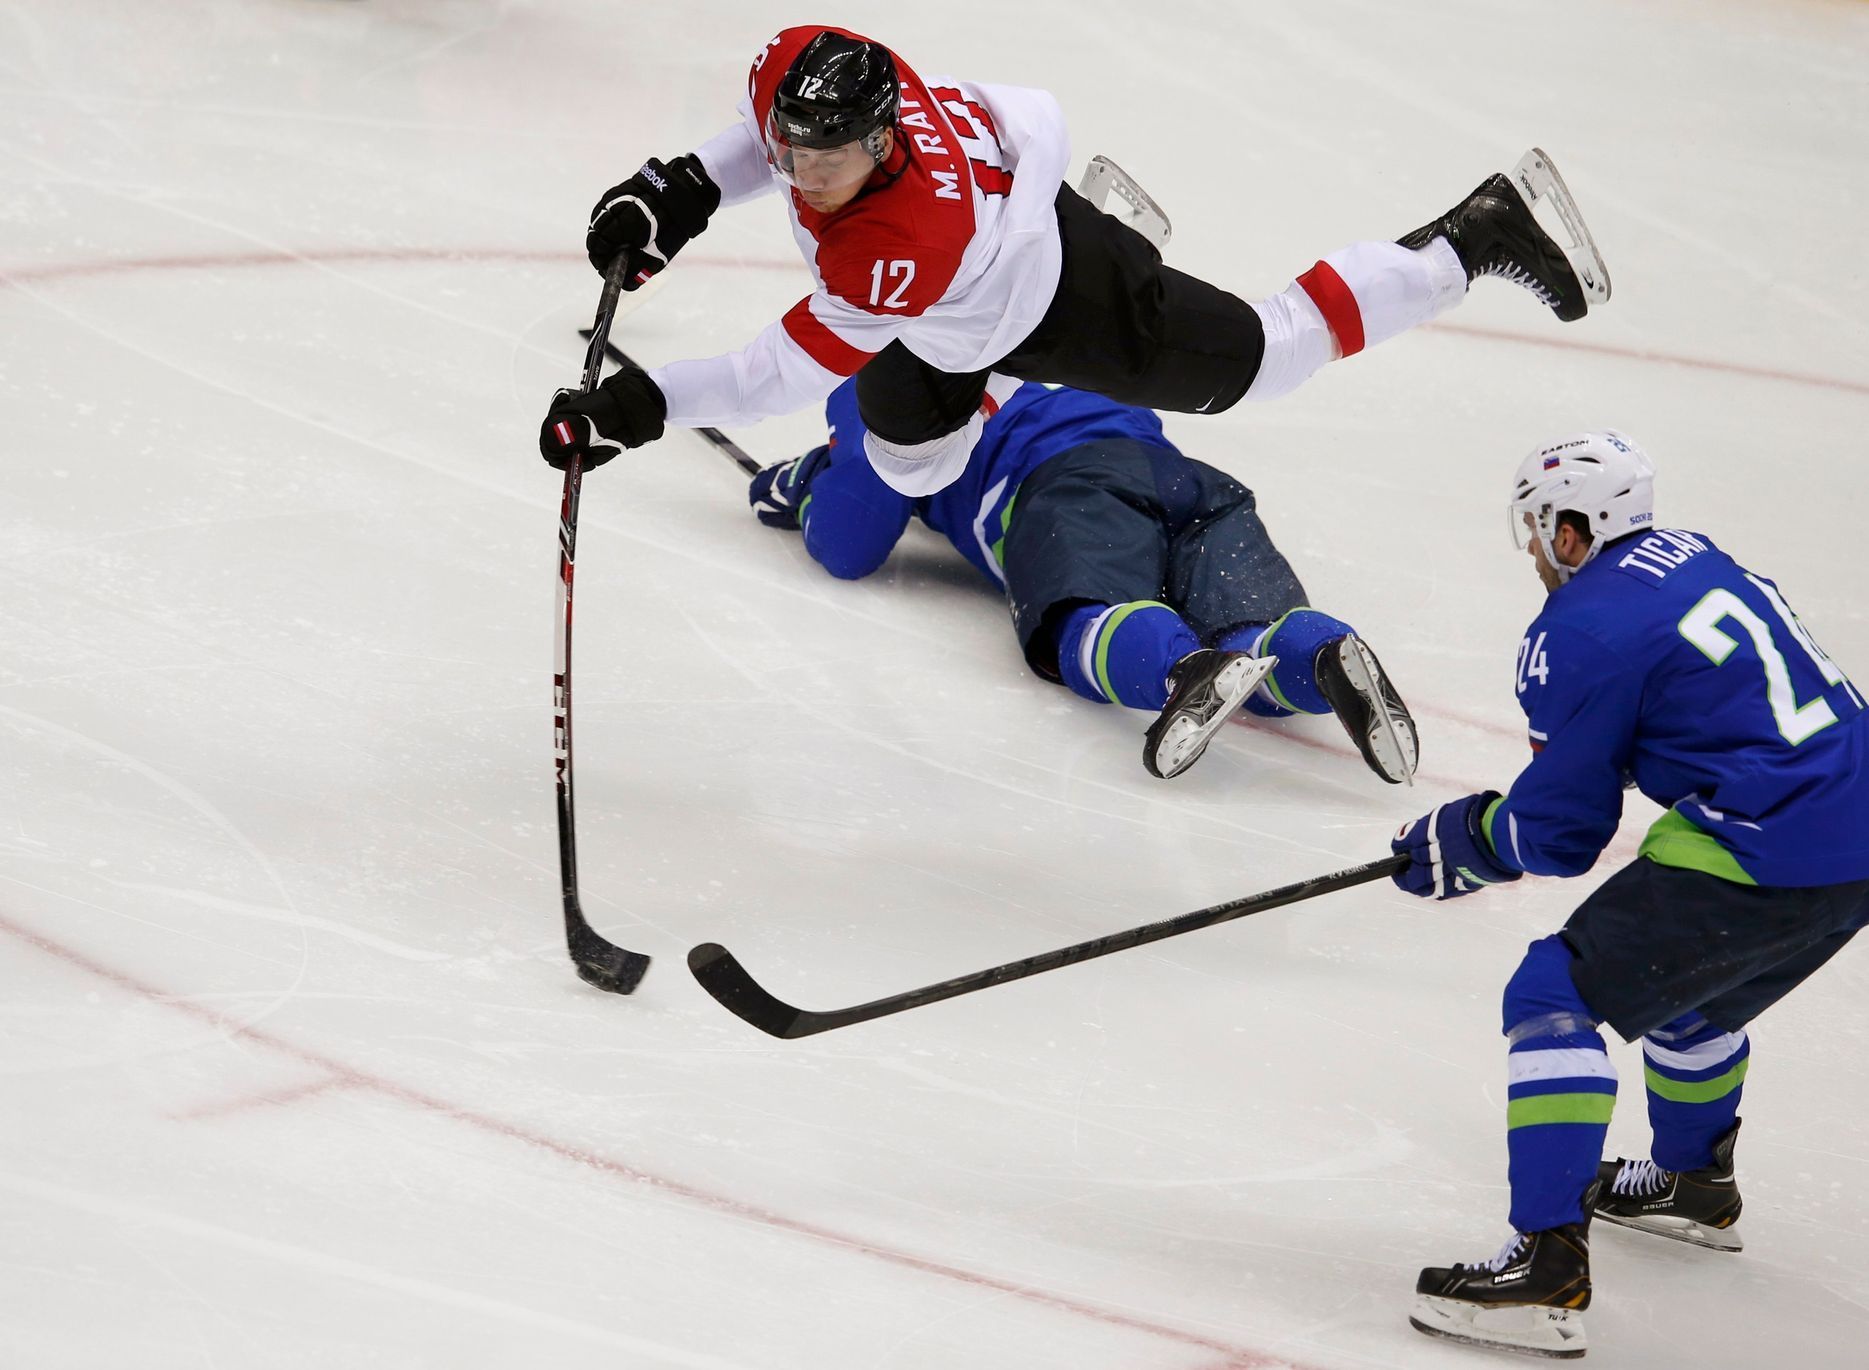 Austria's Michael Raffl flies through the air after tripping over Slovenia's Ziga Pavlin during the second period of their men's ice hockey playoffs qualification game at the 2014 Sochi Winter Olympic